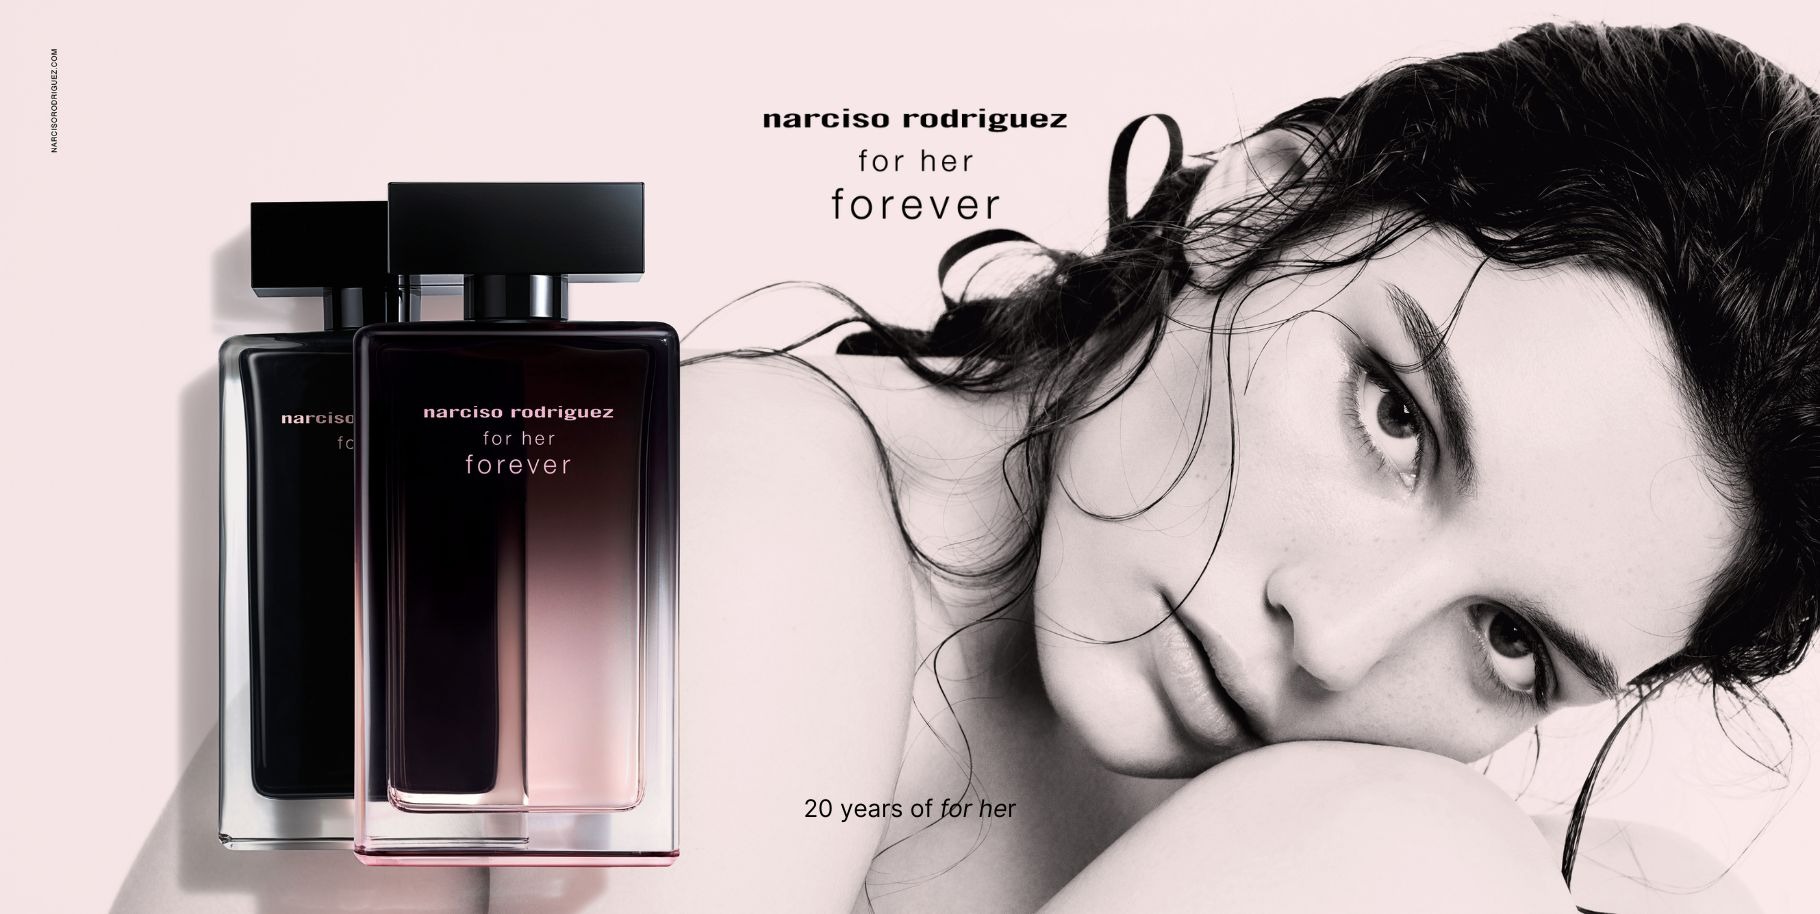 nuoc hoa narciso rodriguez for her forever edp review